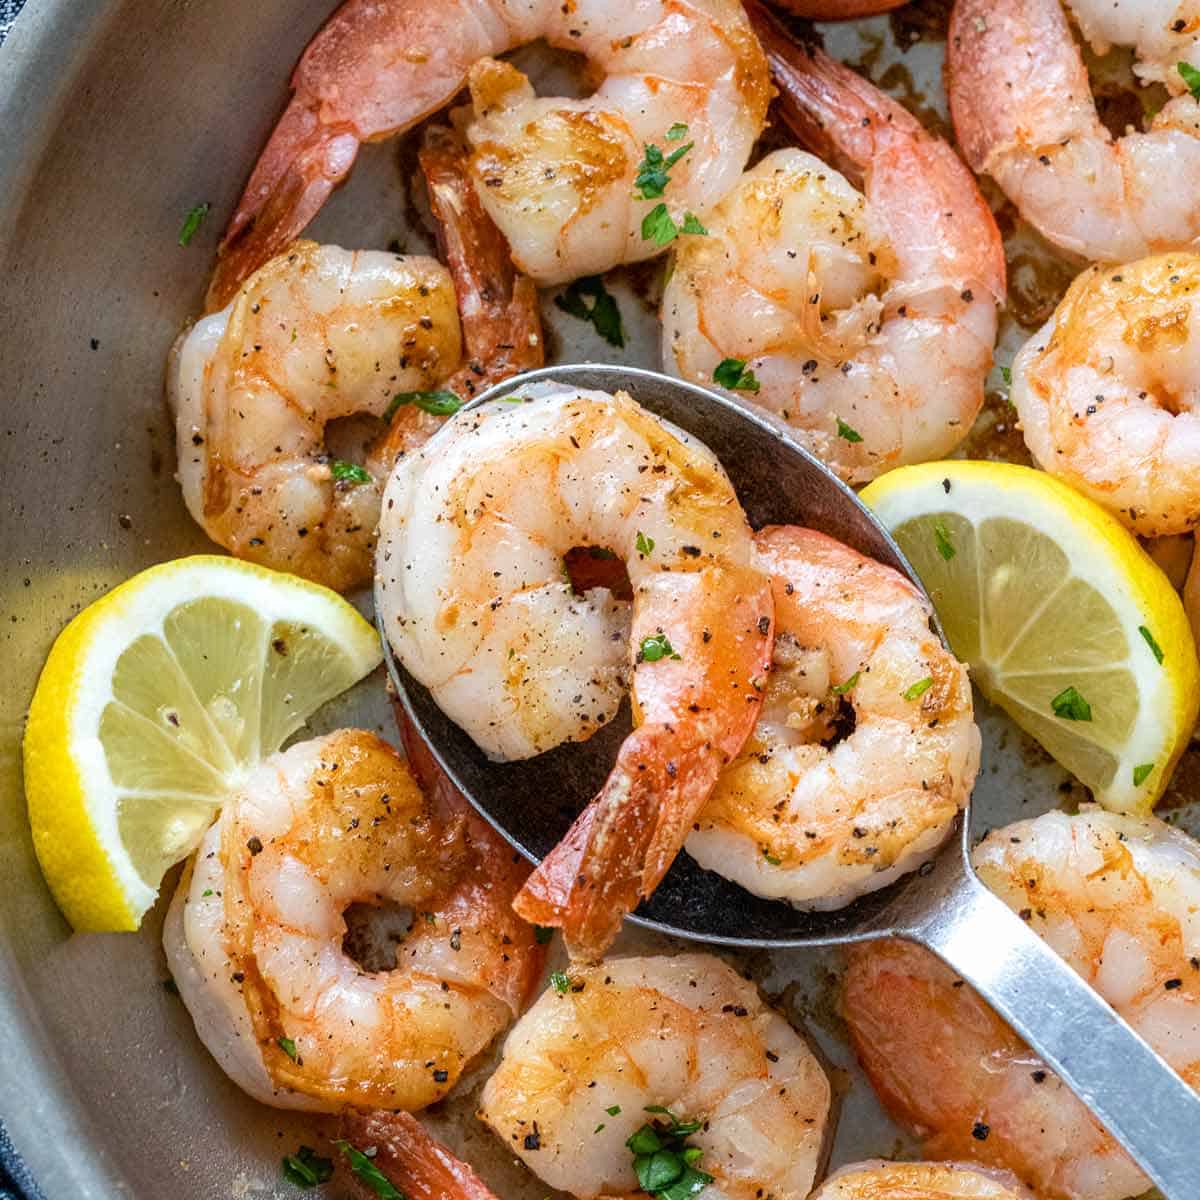 How To Store Cooked Shrimp